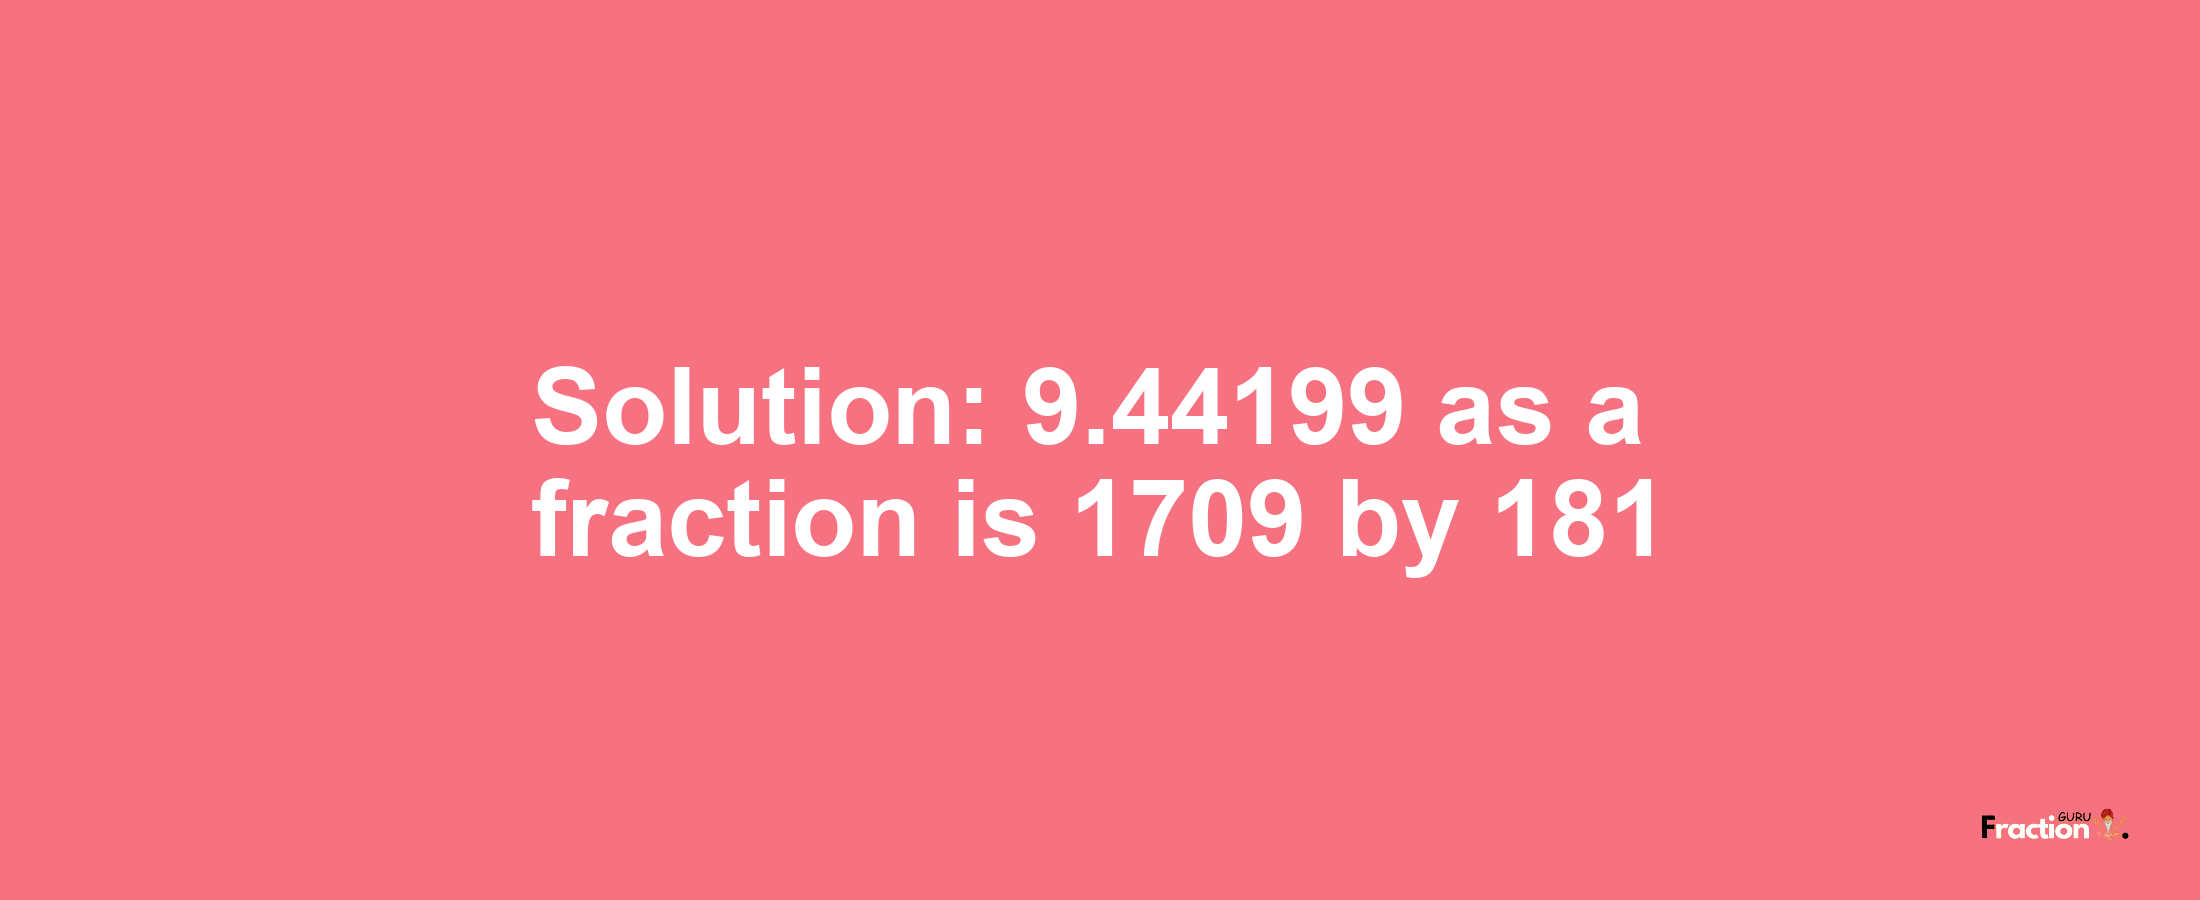 Solution:9.44199 as a fraction is 1709/181